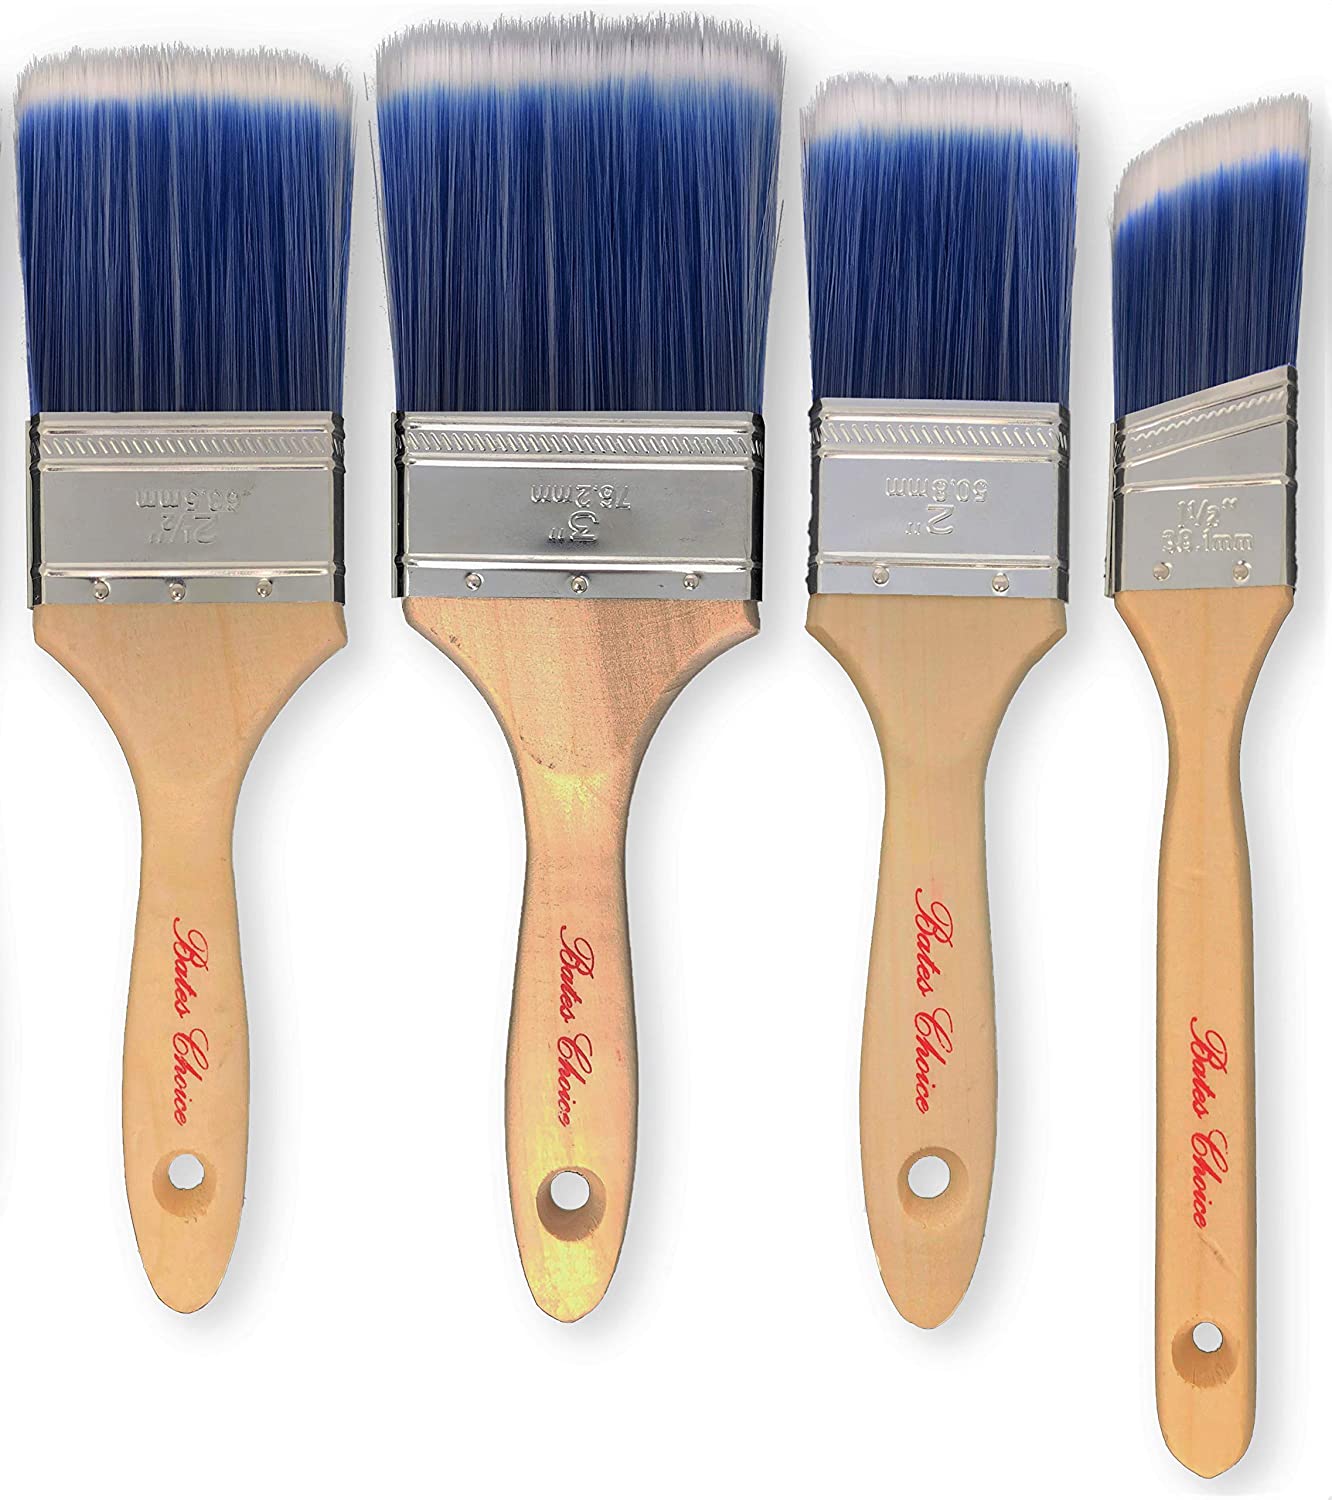 Paint Brushes - 4 Pack, Treated Wood Handle, Paint Brush, Paint Brushes  Set, Professional  - Paint Brushes, Facebook Marketplace